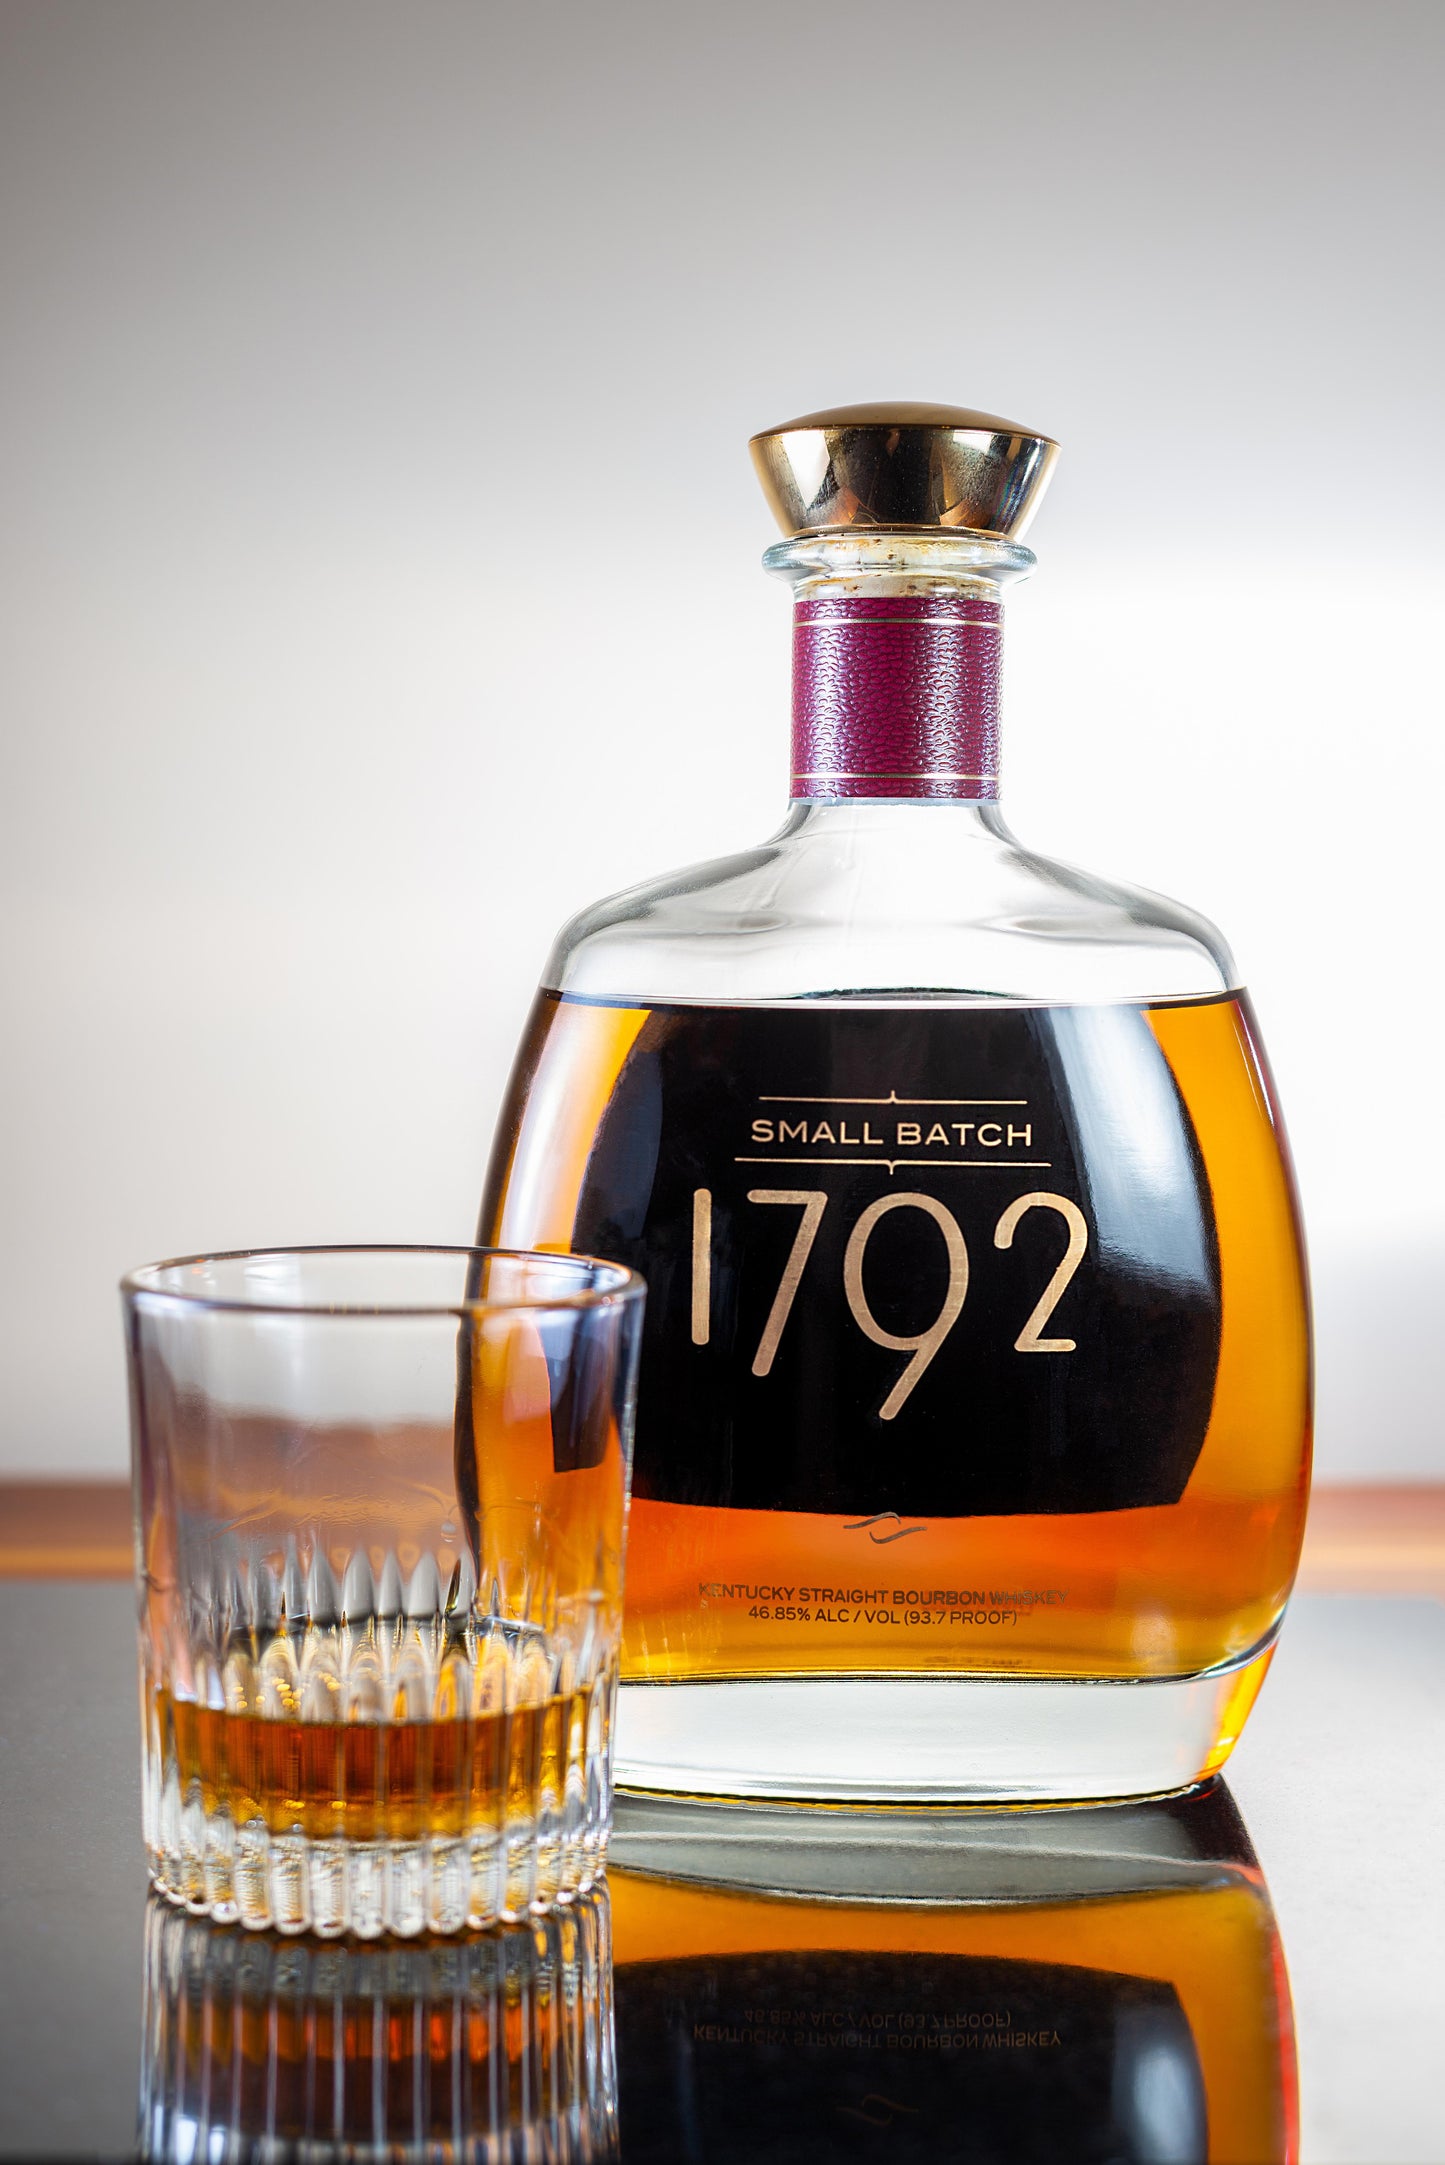 1792 Small Batch Bourbon Whiskey  (75cl; 46.85%)